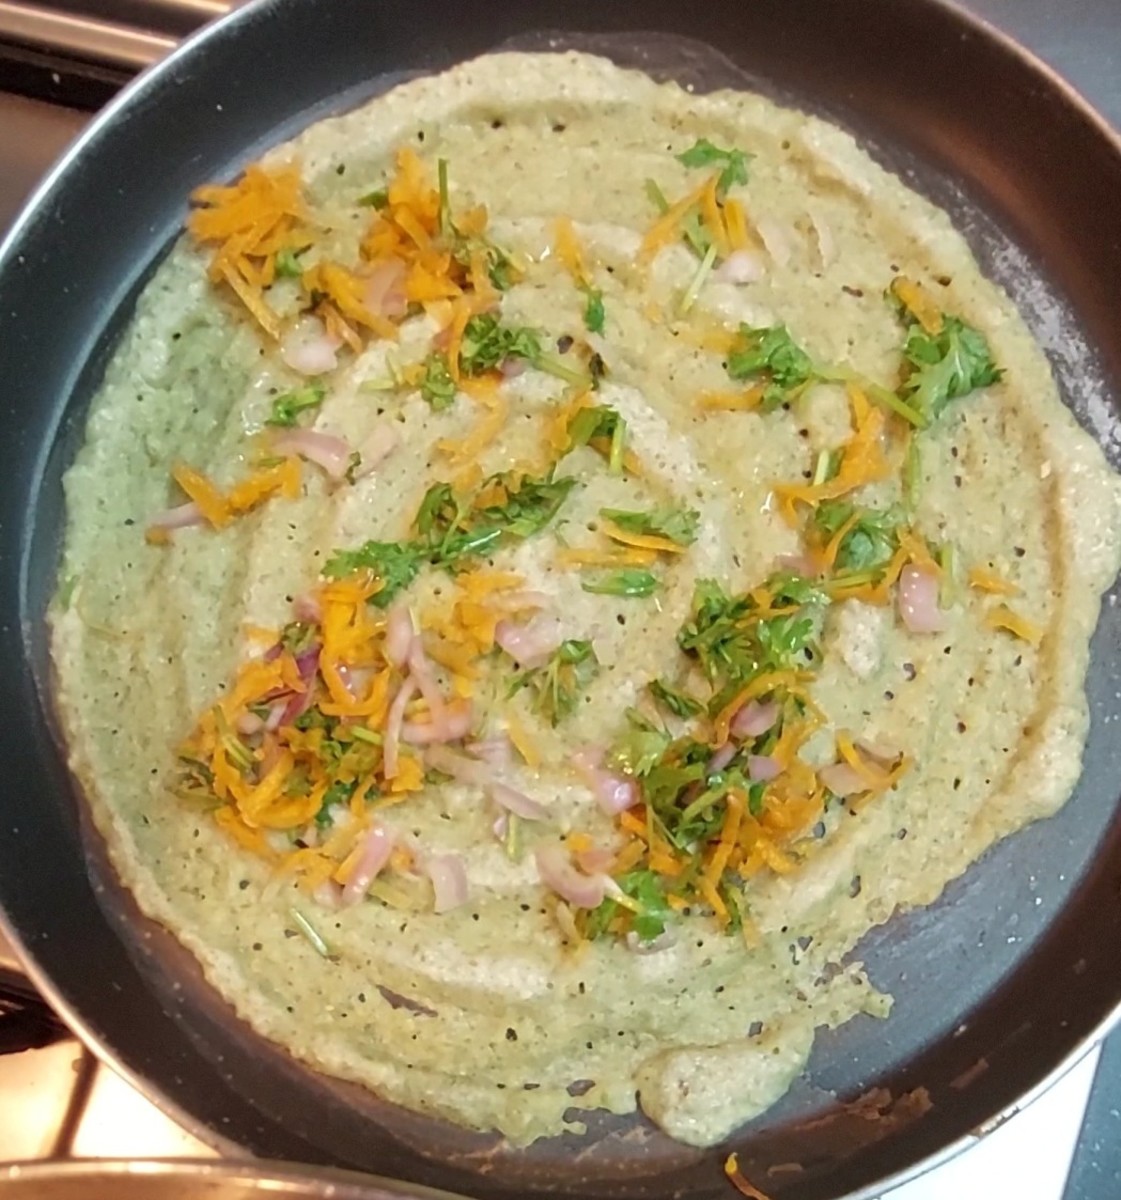 Heat a dosa tawa. Add a ladle full of dosa batter and spread it in a circular motion to make a thin dosa. Spread the chopped vegetables on top, and then drizzle a spoon of ghee on the dosa,